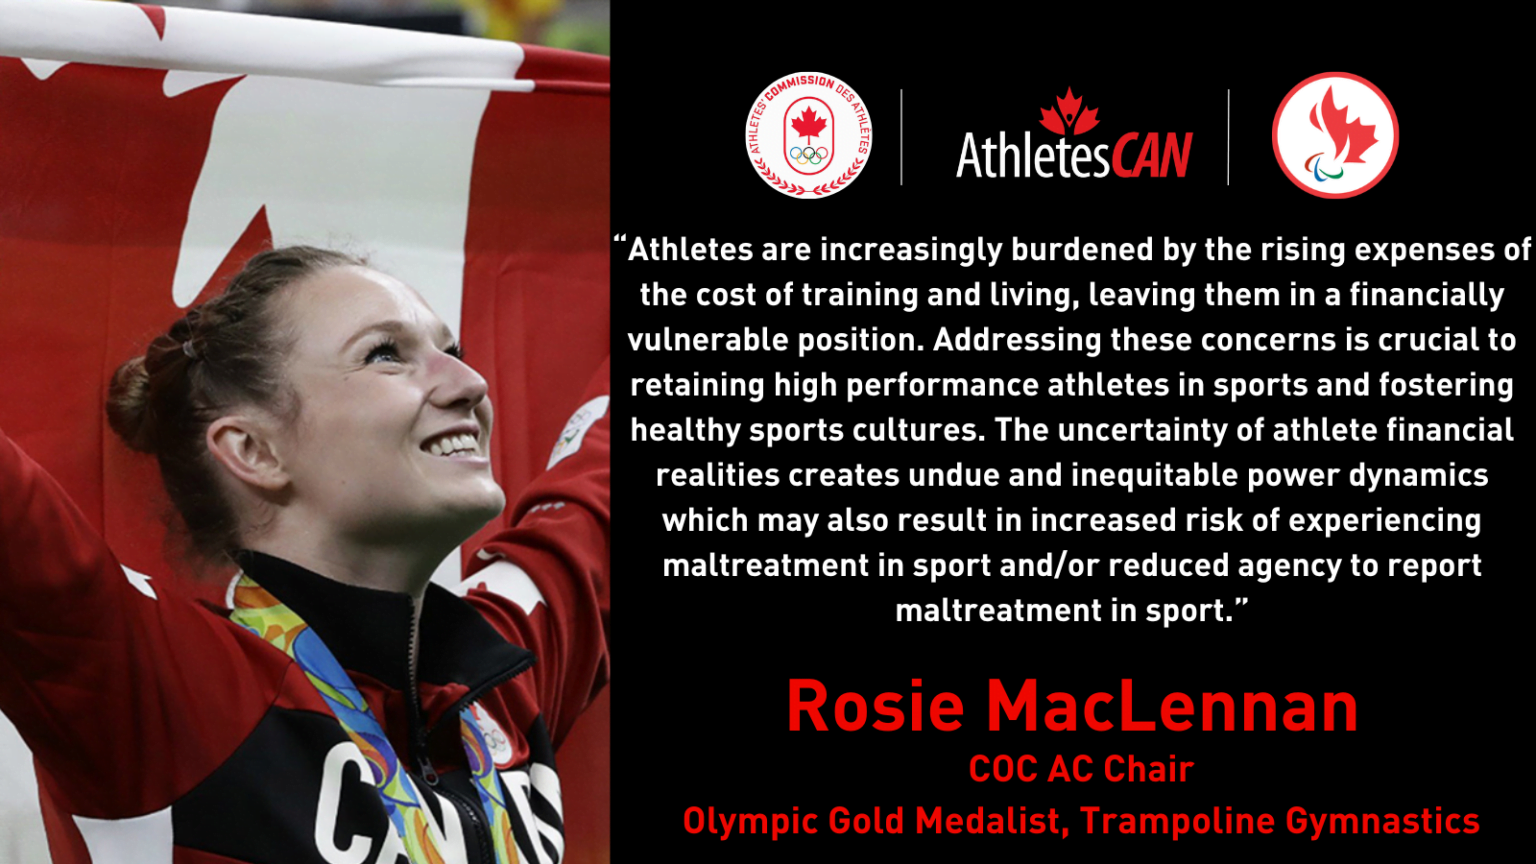 “Athletes are increasingly burdened by the rising expenses of the cost of training and living, leaving them in a financially vulnerable position,” said COC AC Chair and Olympic gold medalist in trampoline gymnastics Rosie MacLennan. “Addressing these concerns is crucial to retaining high performance athletes in sports and fostering healthy sports cultures. The uncertainty of athlete financial realities creates undue and inequitable power dynamics which may also result in increased risk of experiencing maltreatment in sport and/or reduced agency to report maltreatment in sport.”